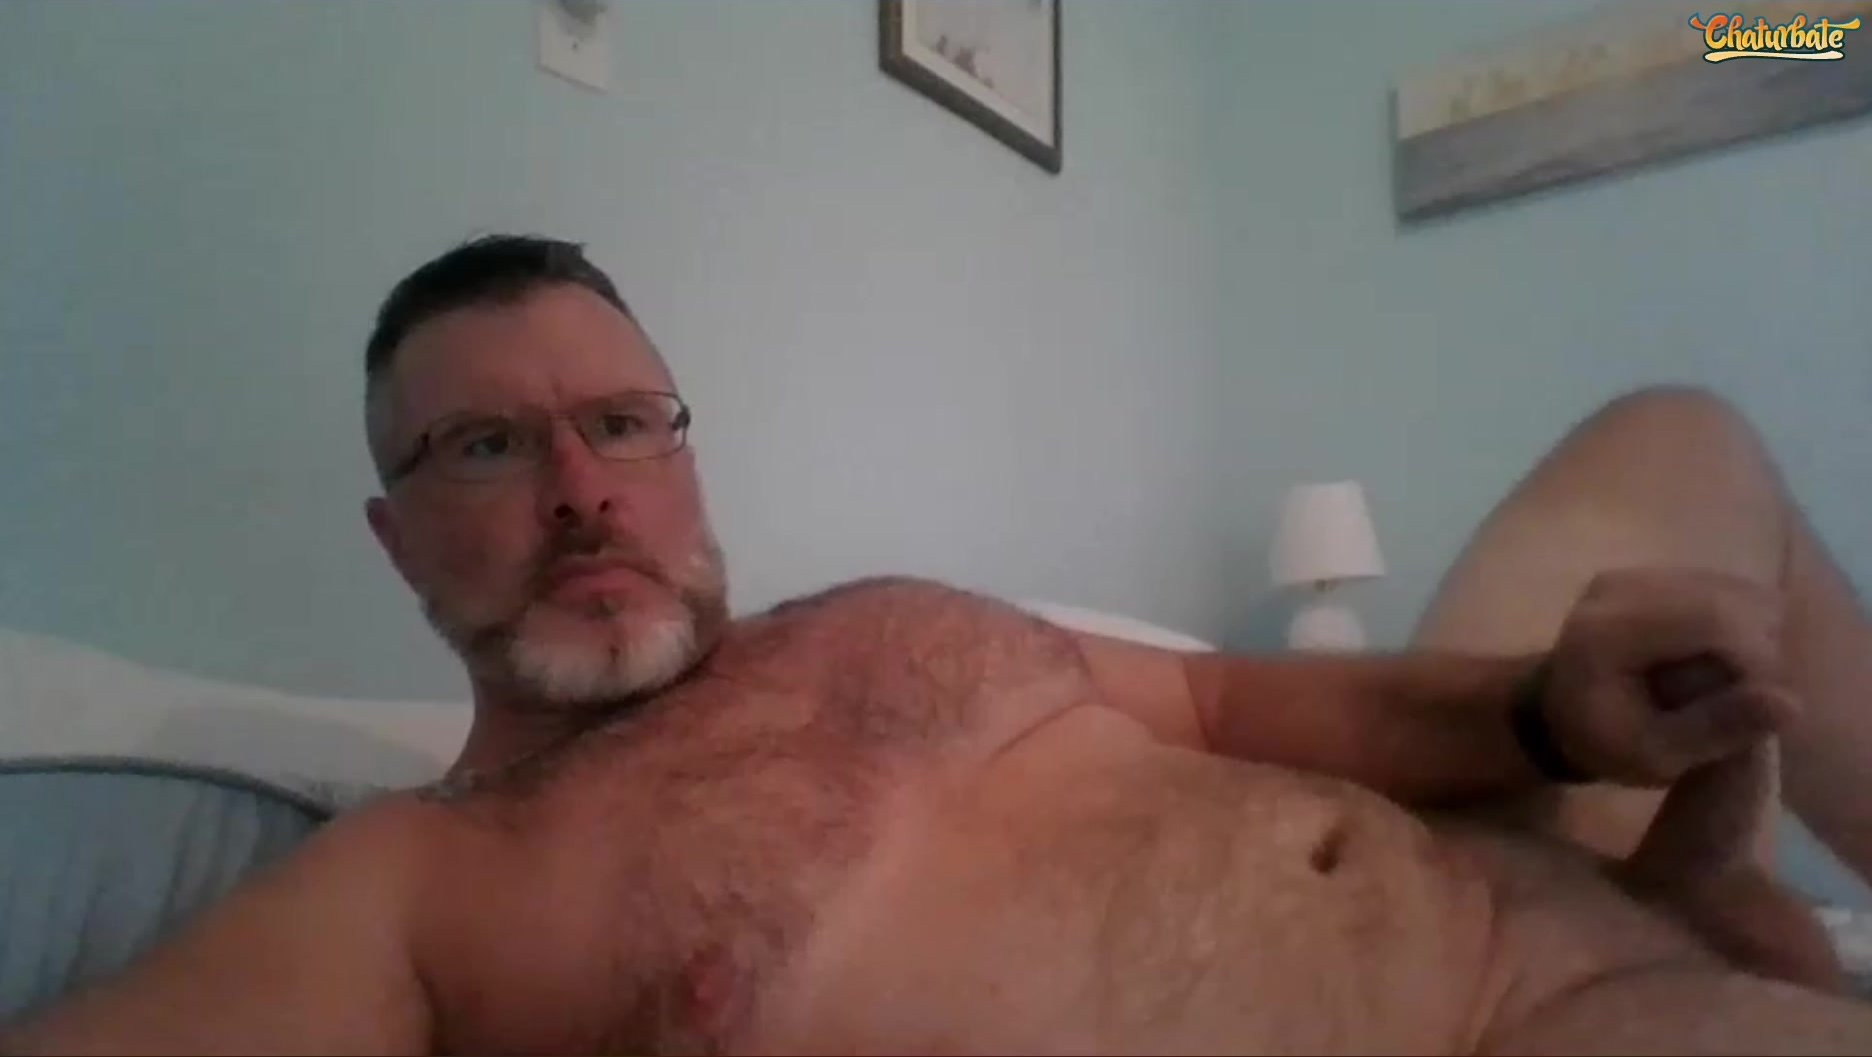 beefy daddy strokes on cam